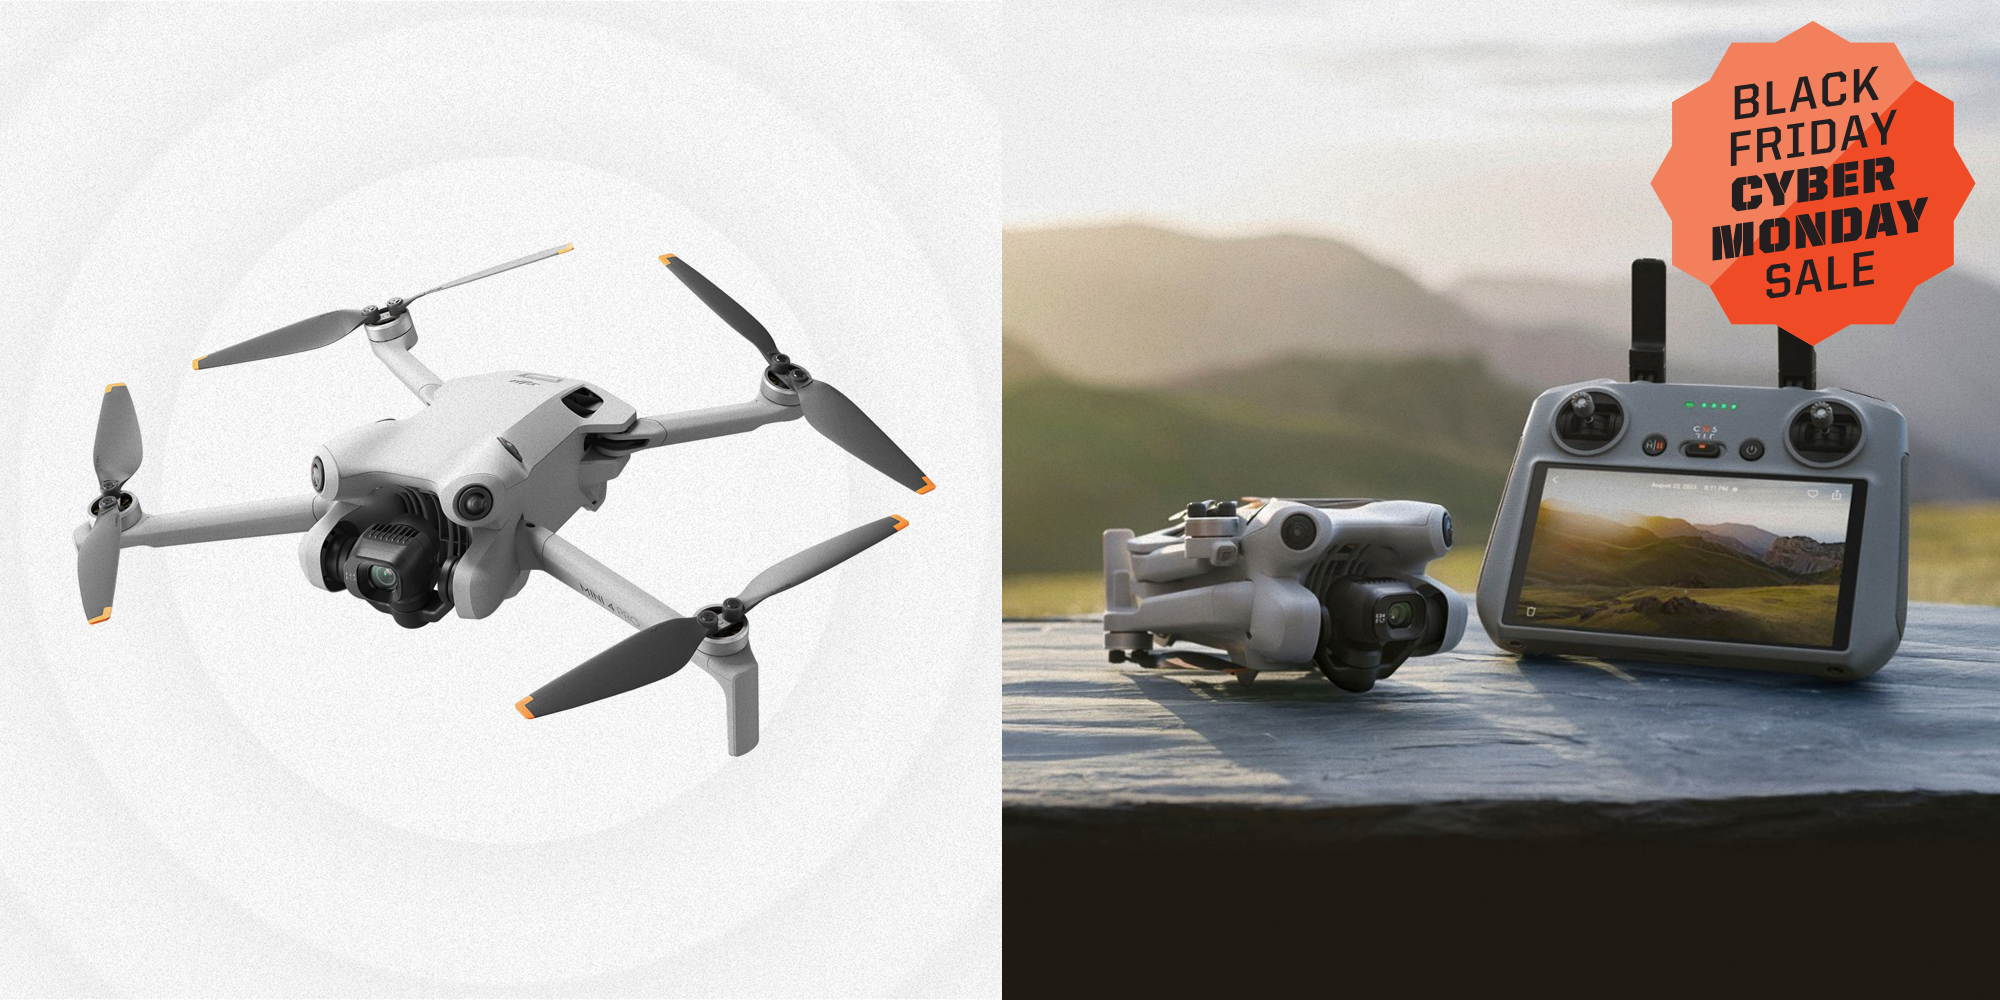 Black Friday: This 4K camera drone is $40 off now